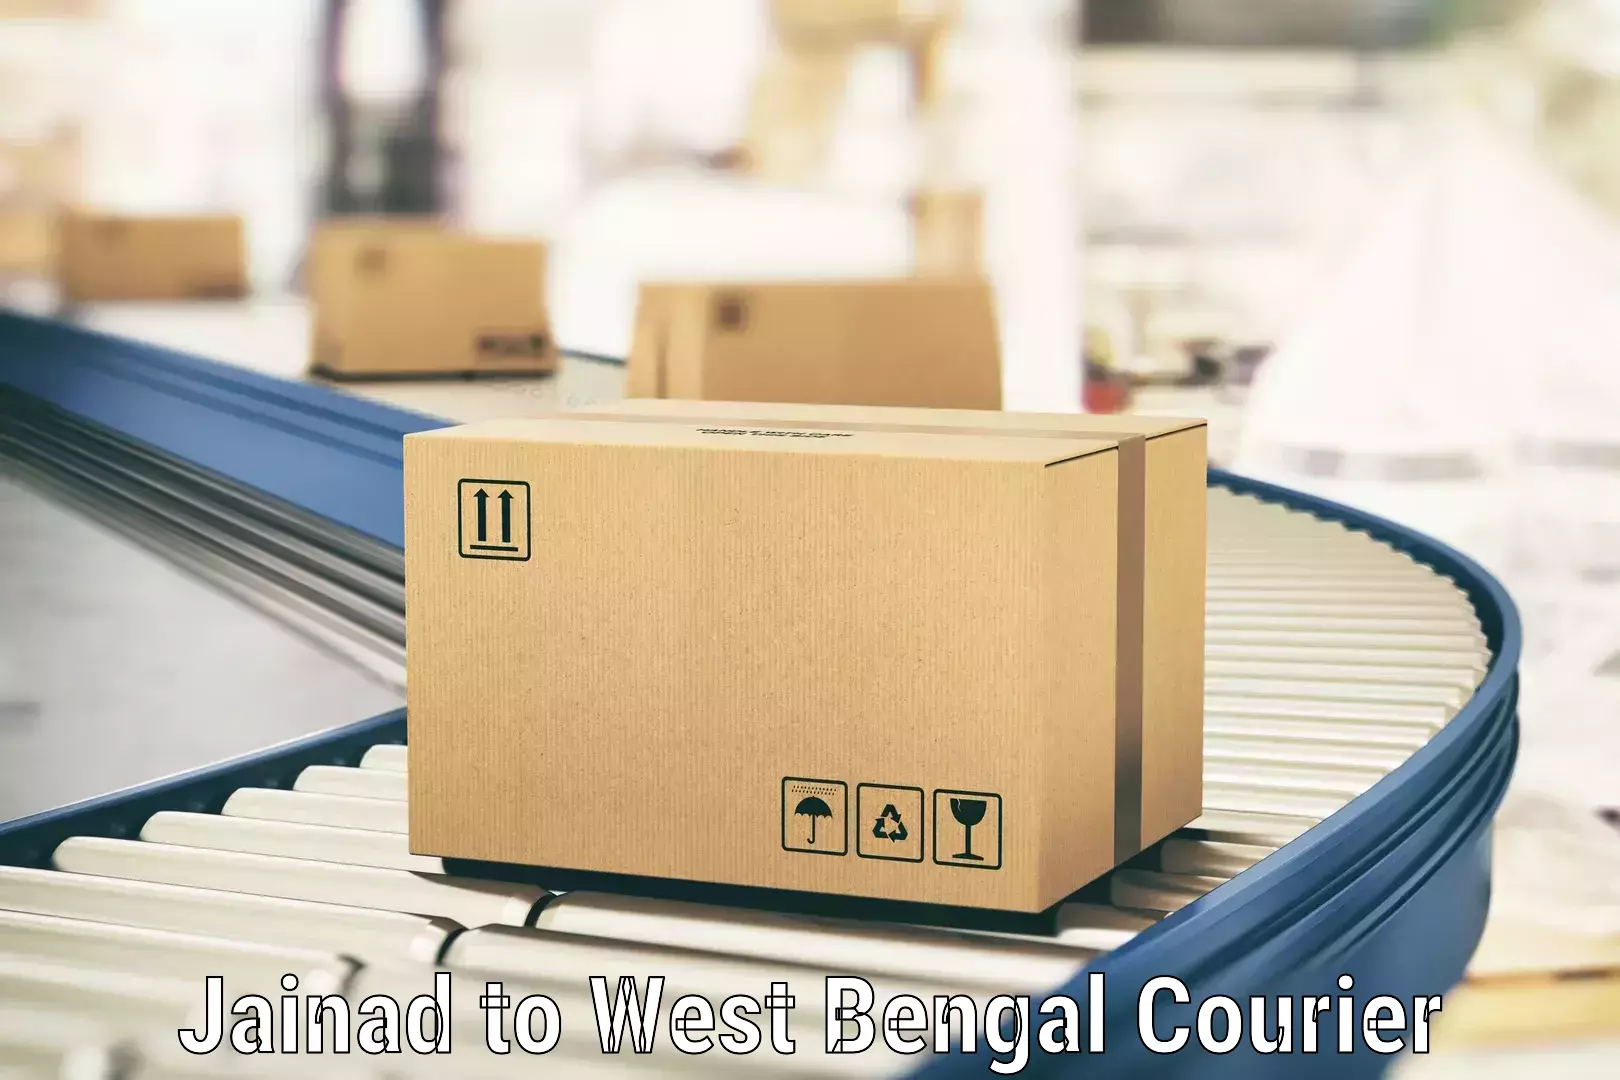 Personal parcel delivery in Jainad to Mirzapur Bardhaman